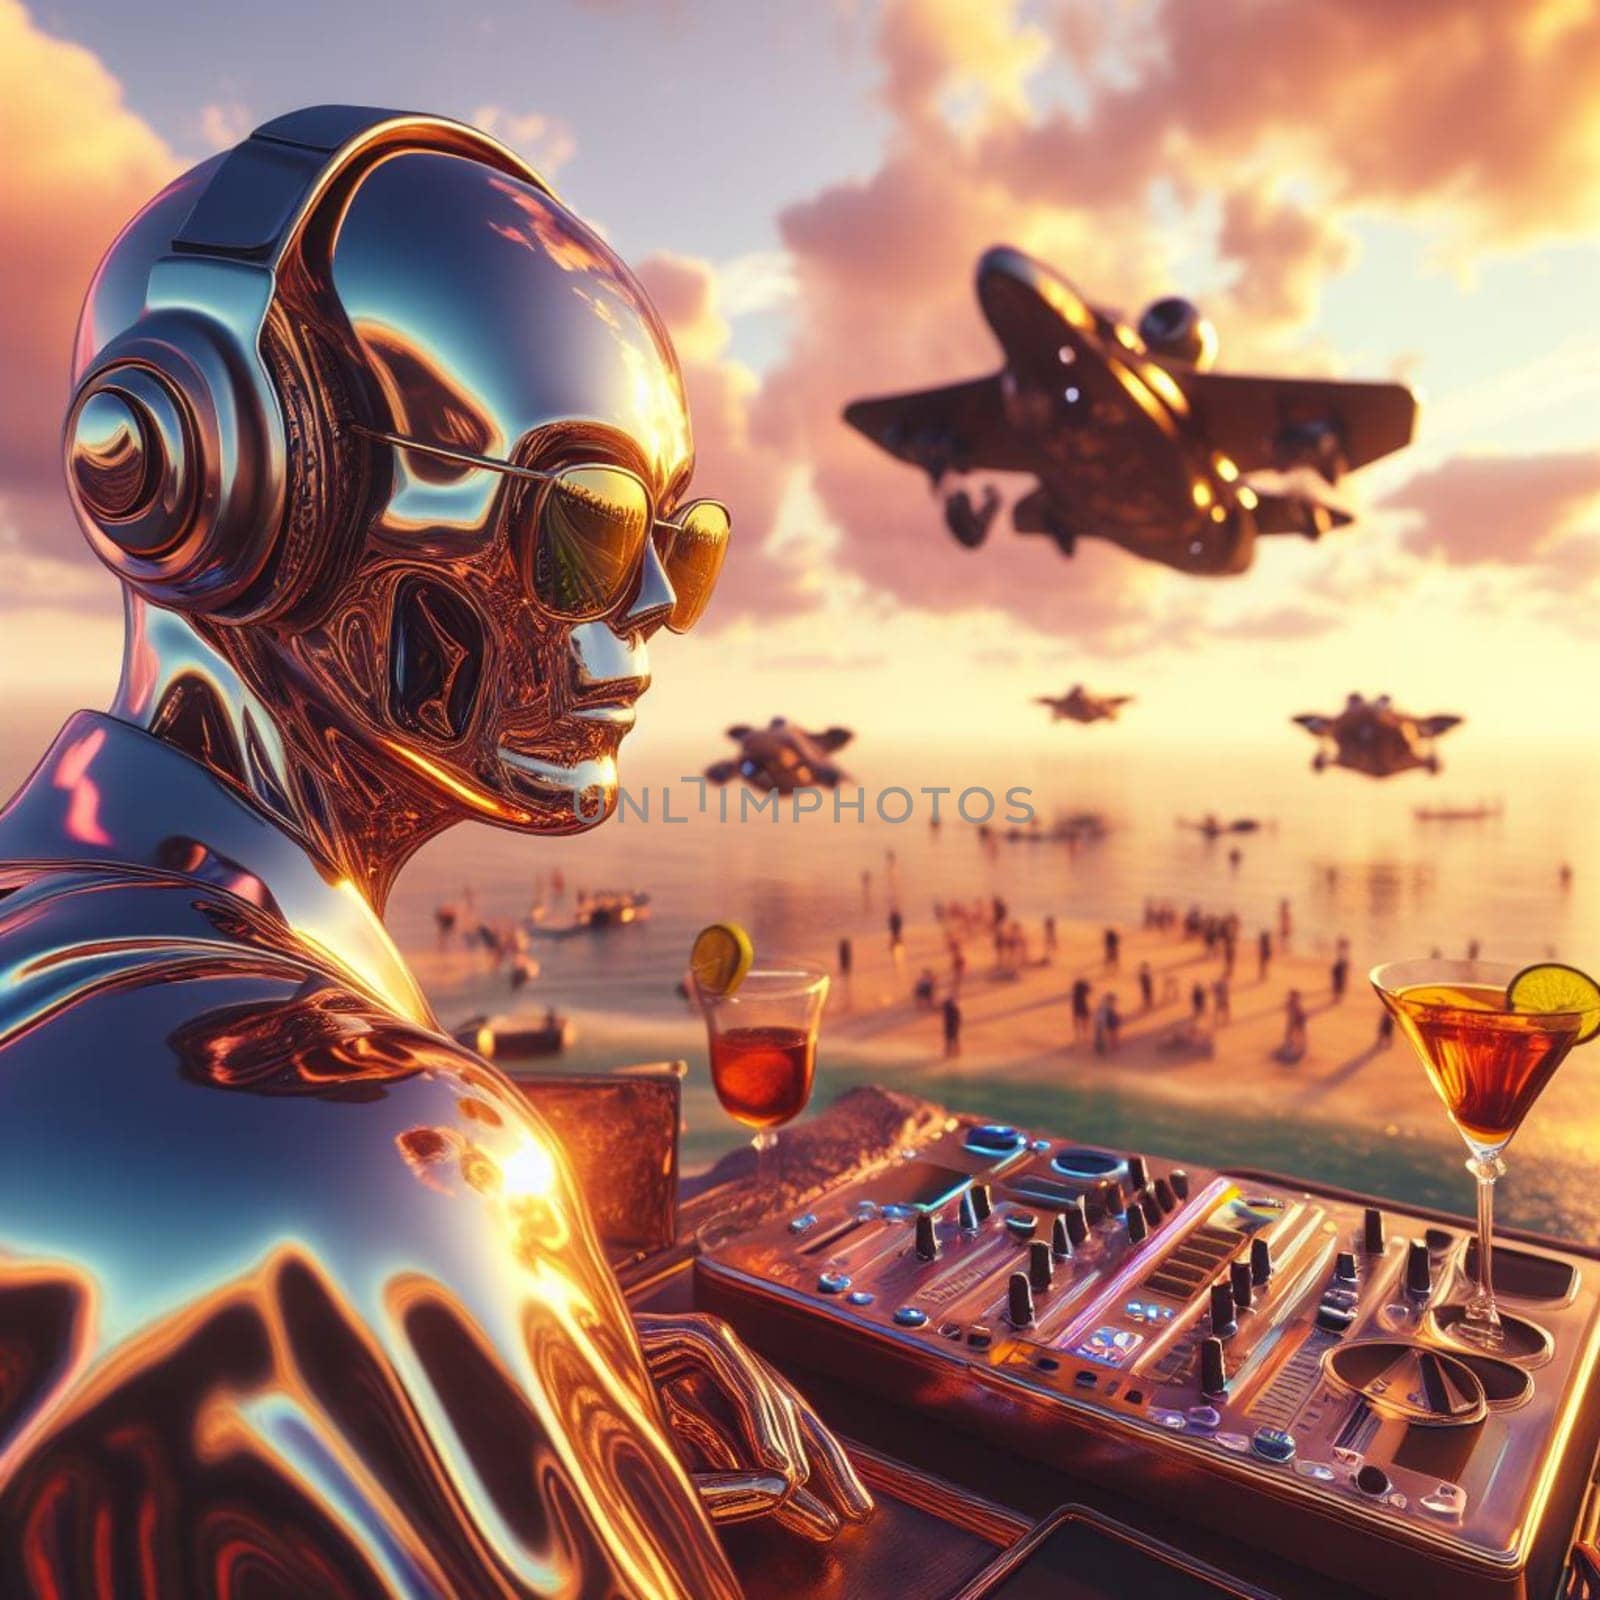 metallic alien deejay, hosting a crowded beach party in tropical island at sunset surreal scene by verbano